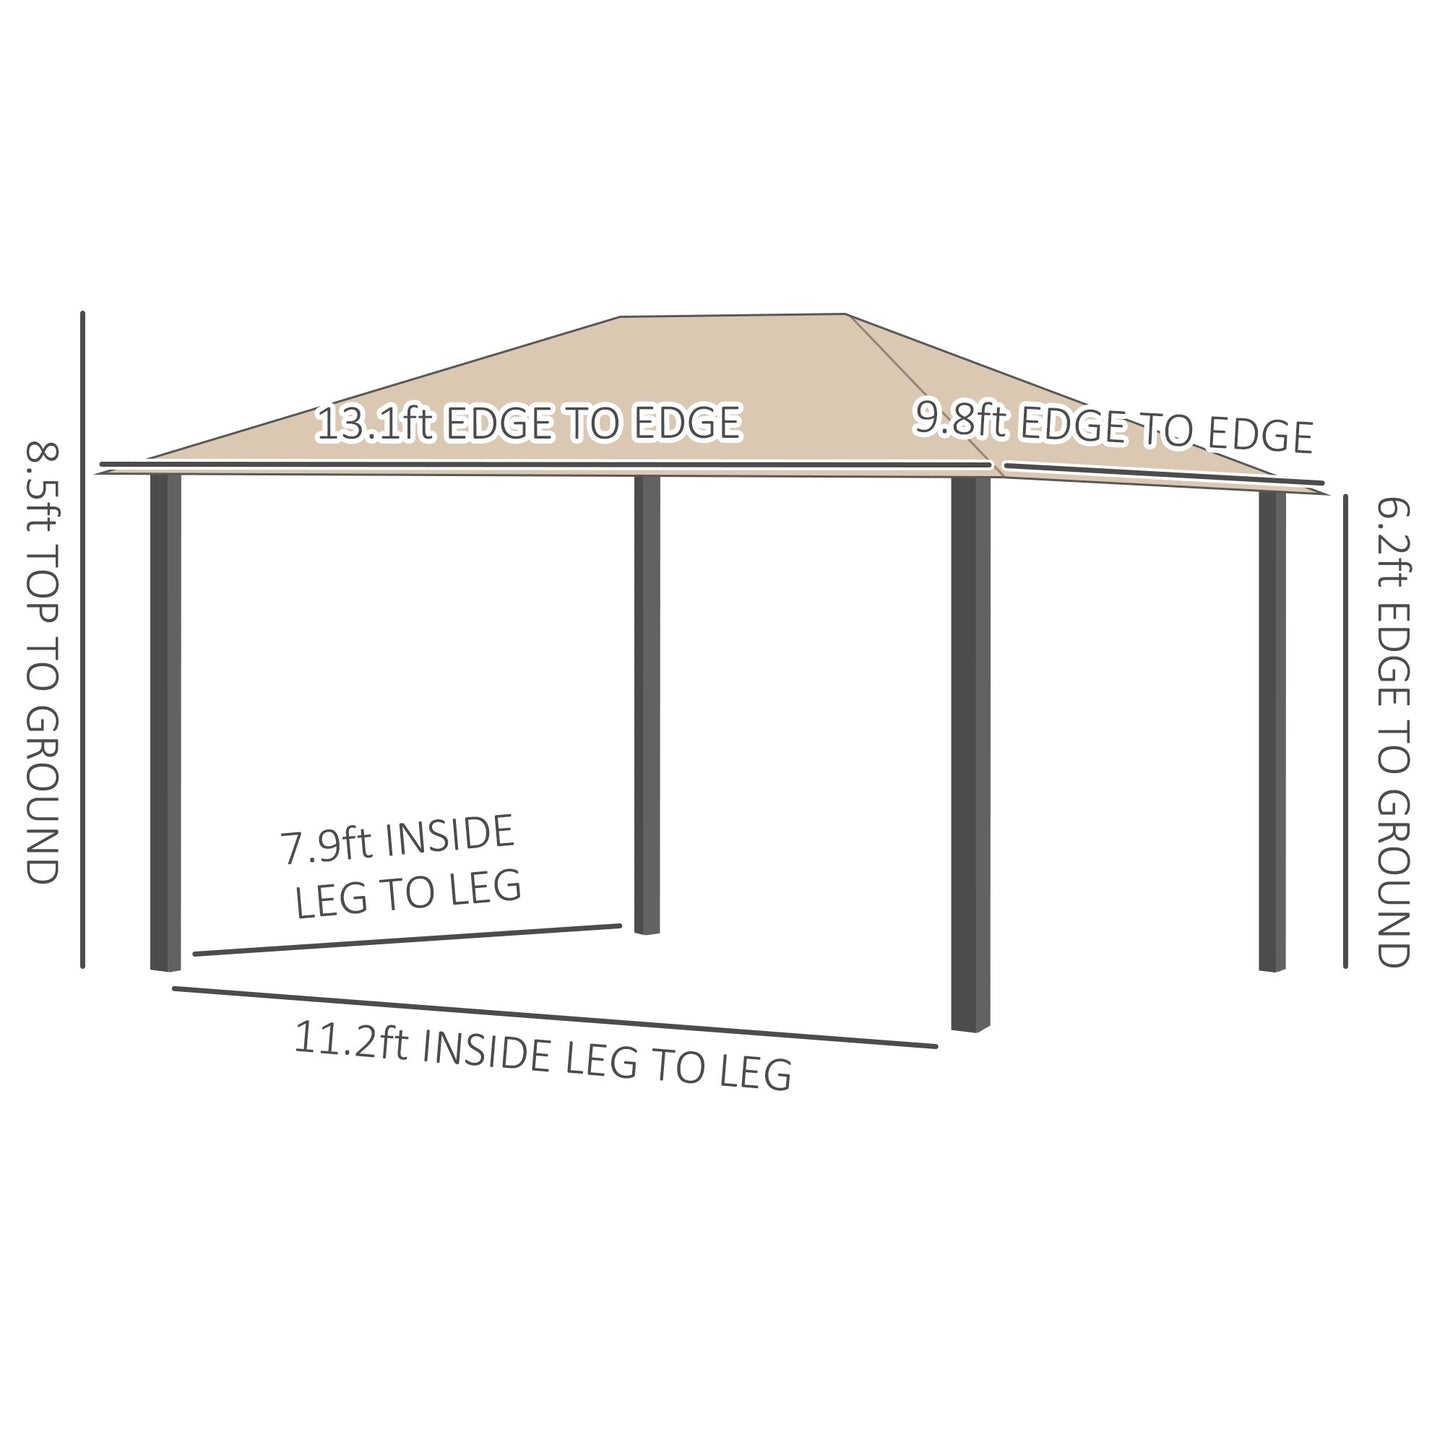 -Outsunny 10' x 13' Patio Gazebo Aluminum Frame Outdoor Canopy Shelter with Sidewalls, Vented Roof for Garden, Lawn, Backyard and Deck, Brown - Outdoor Style Company